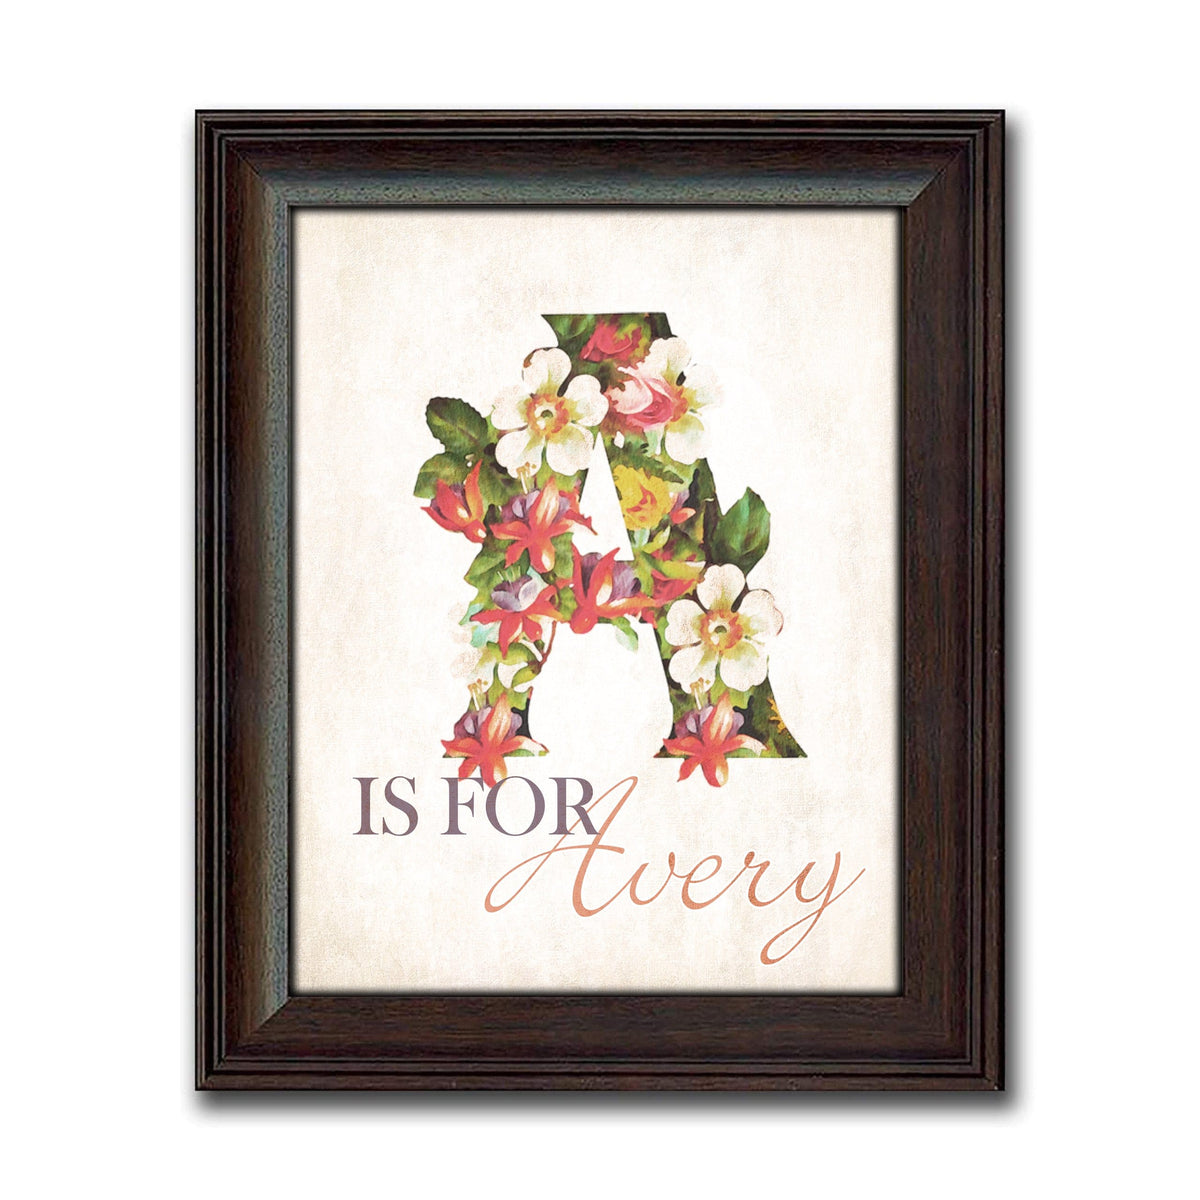 Personalized floral monogram art from Personal Prints